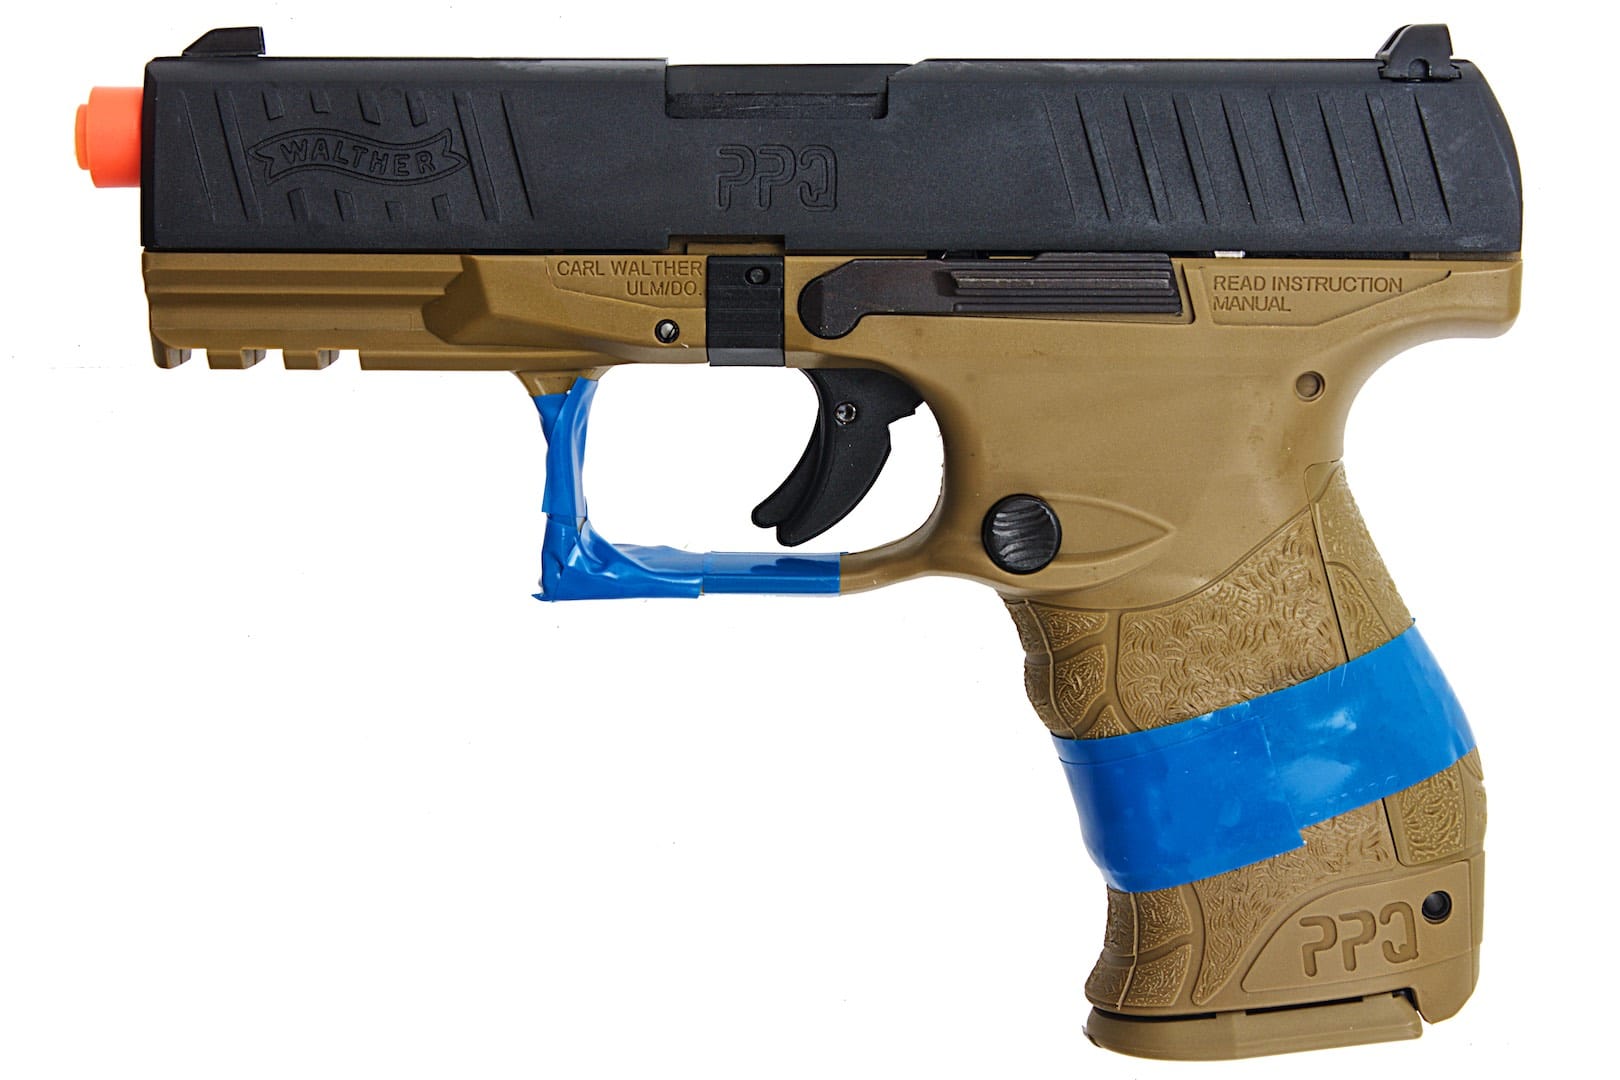 SB199 requires that airsoft pistols have bright colored tape affixed to their pistol grip and trigger guard.